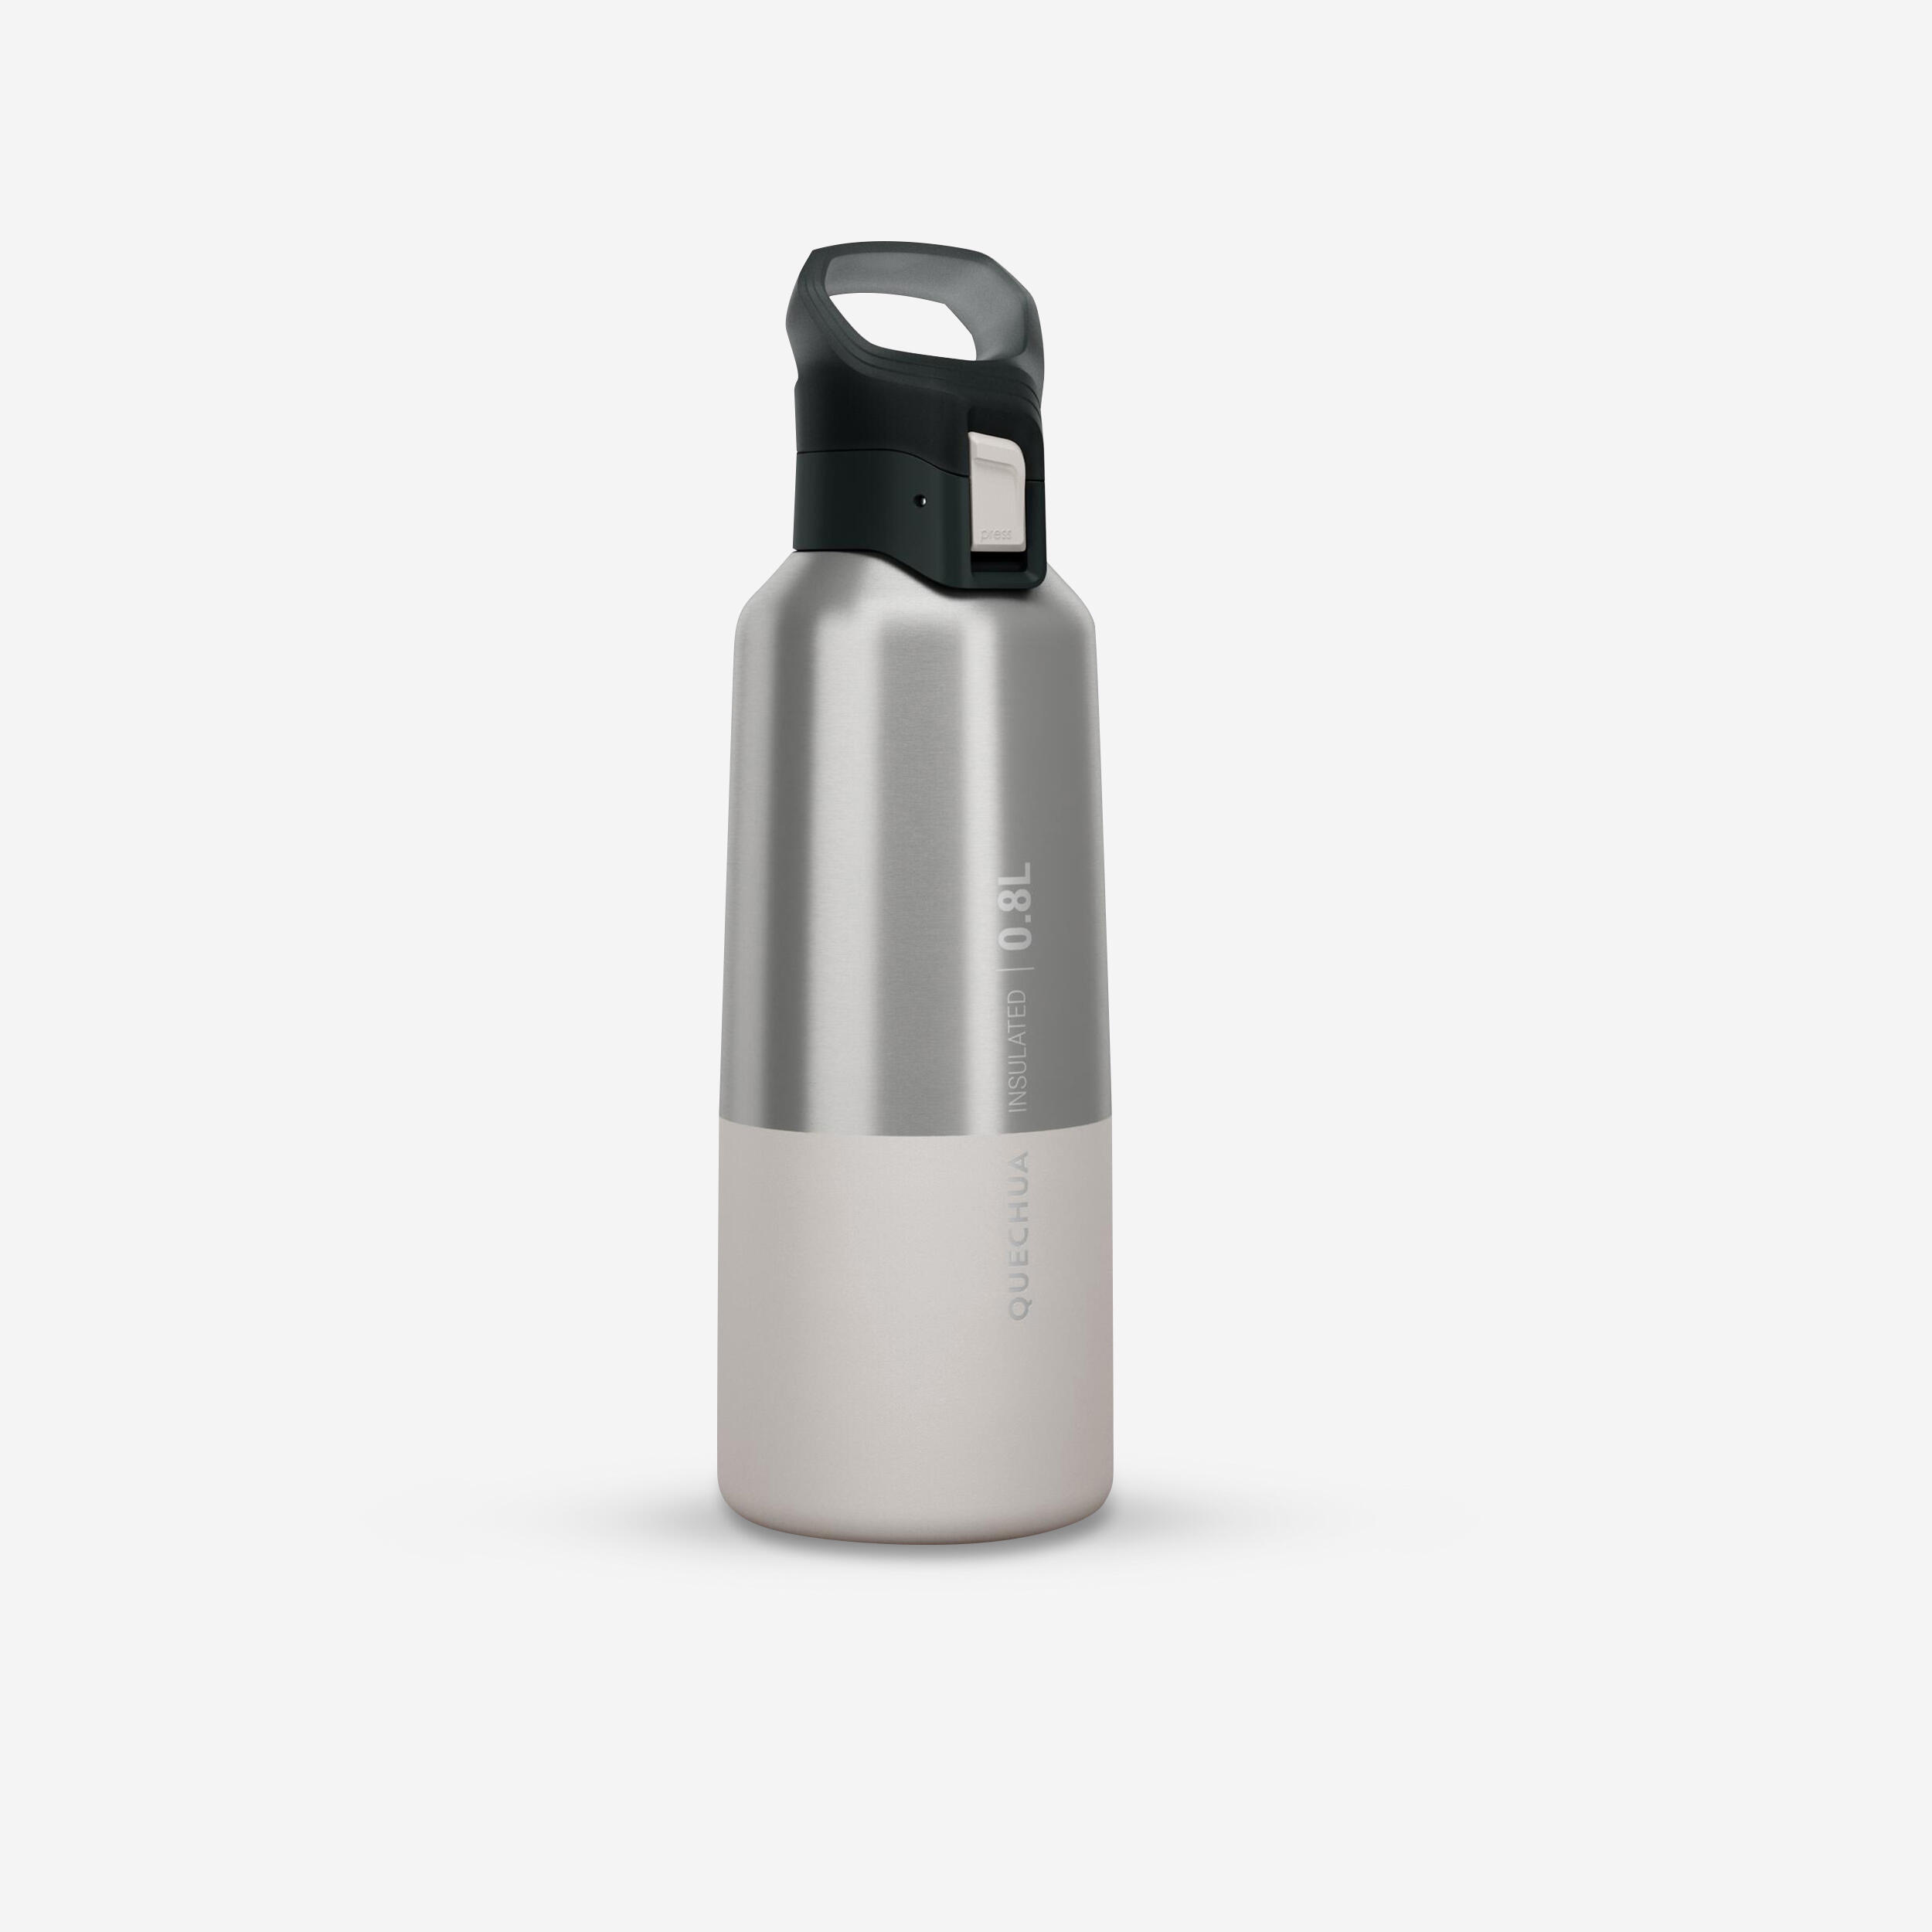 QUECHUA 0.8 L stainless steel isothermal water bottle with quick-release cap for hiking